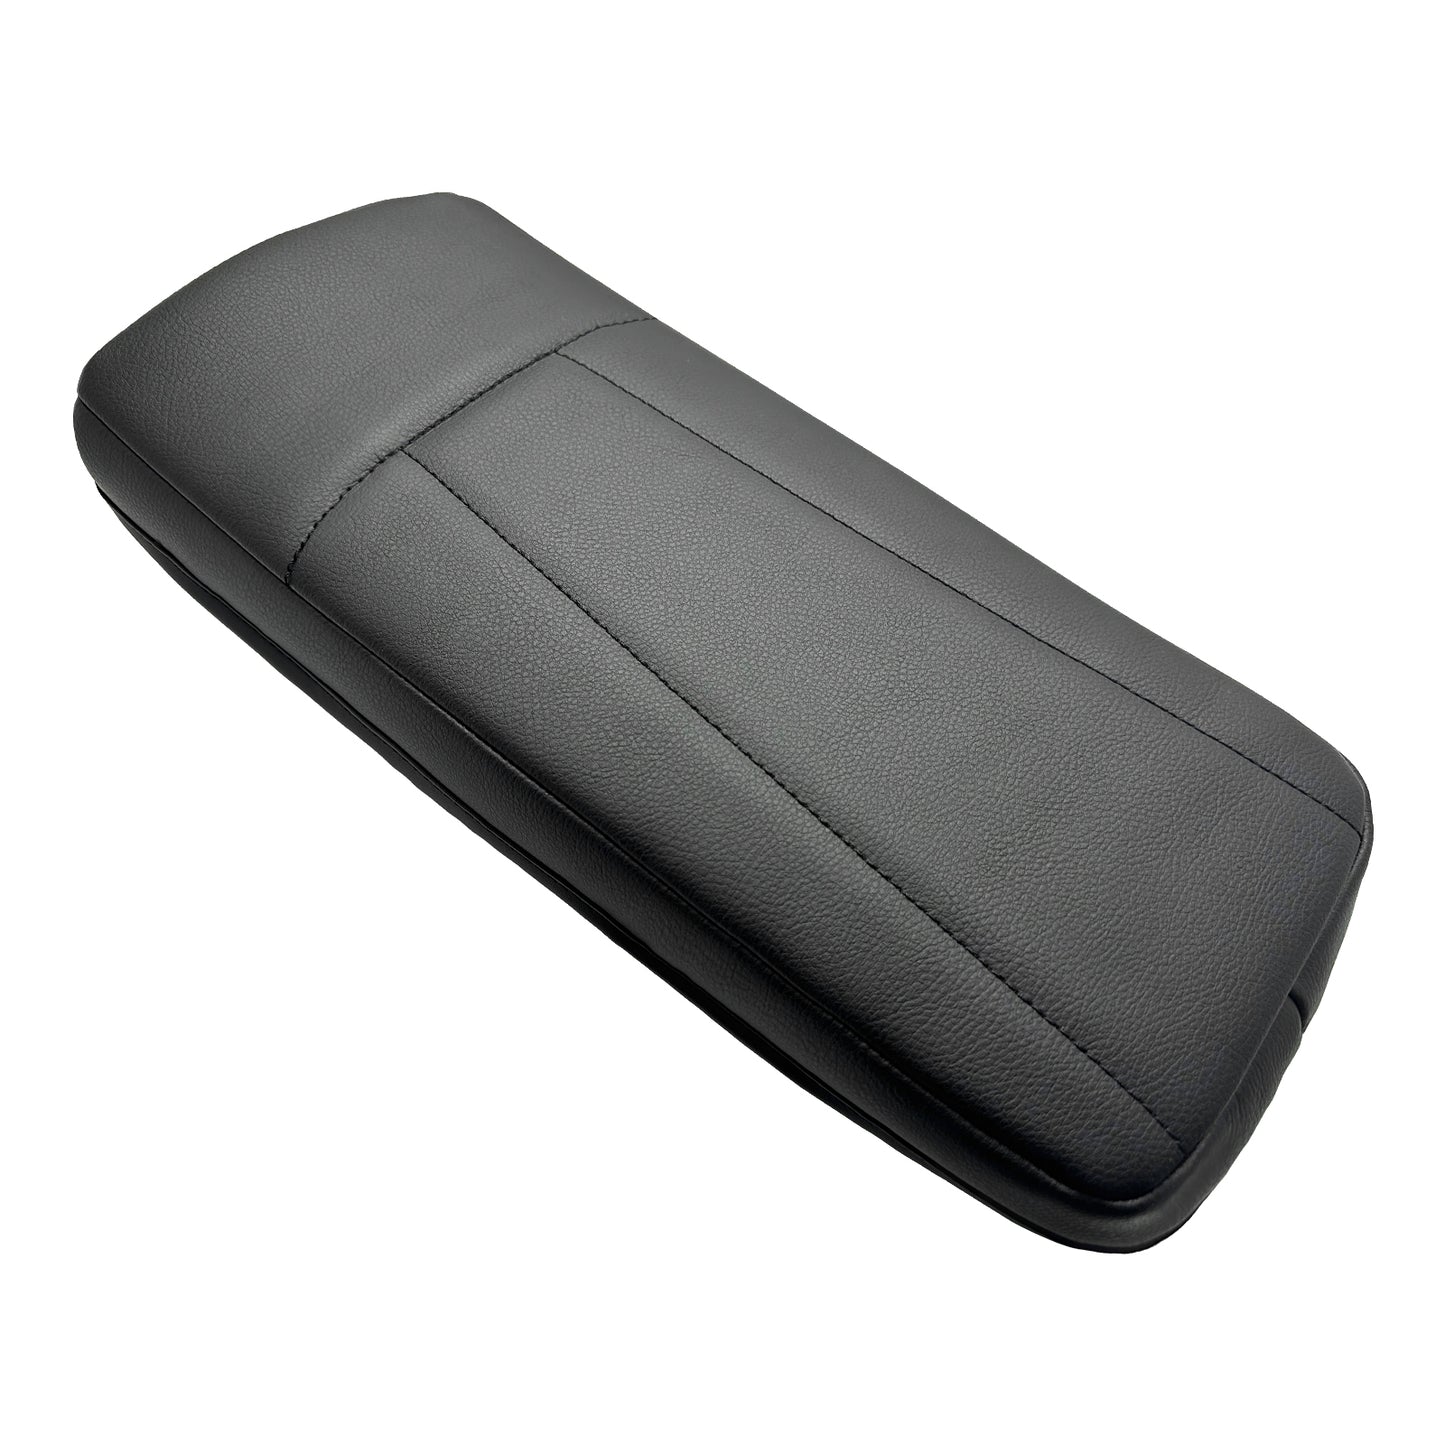 Toyota Prius Vegan Leather Armrest Cover Extra Soft from BestEvMod